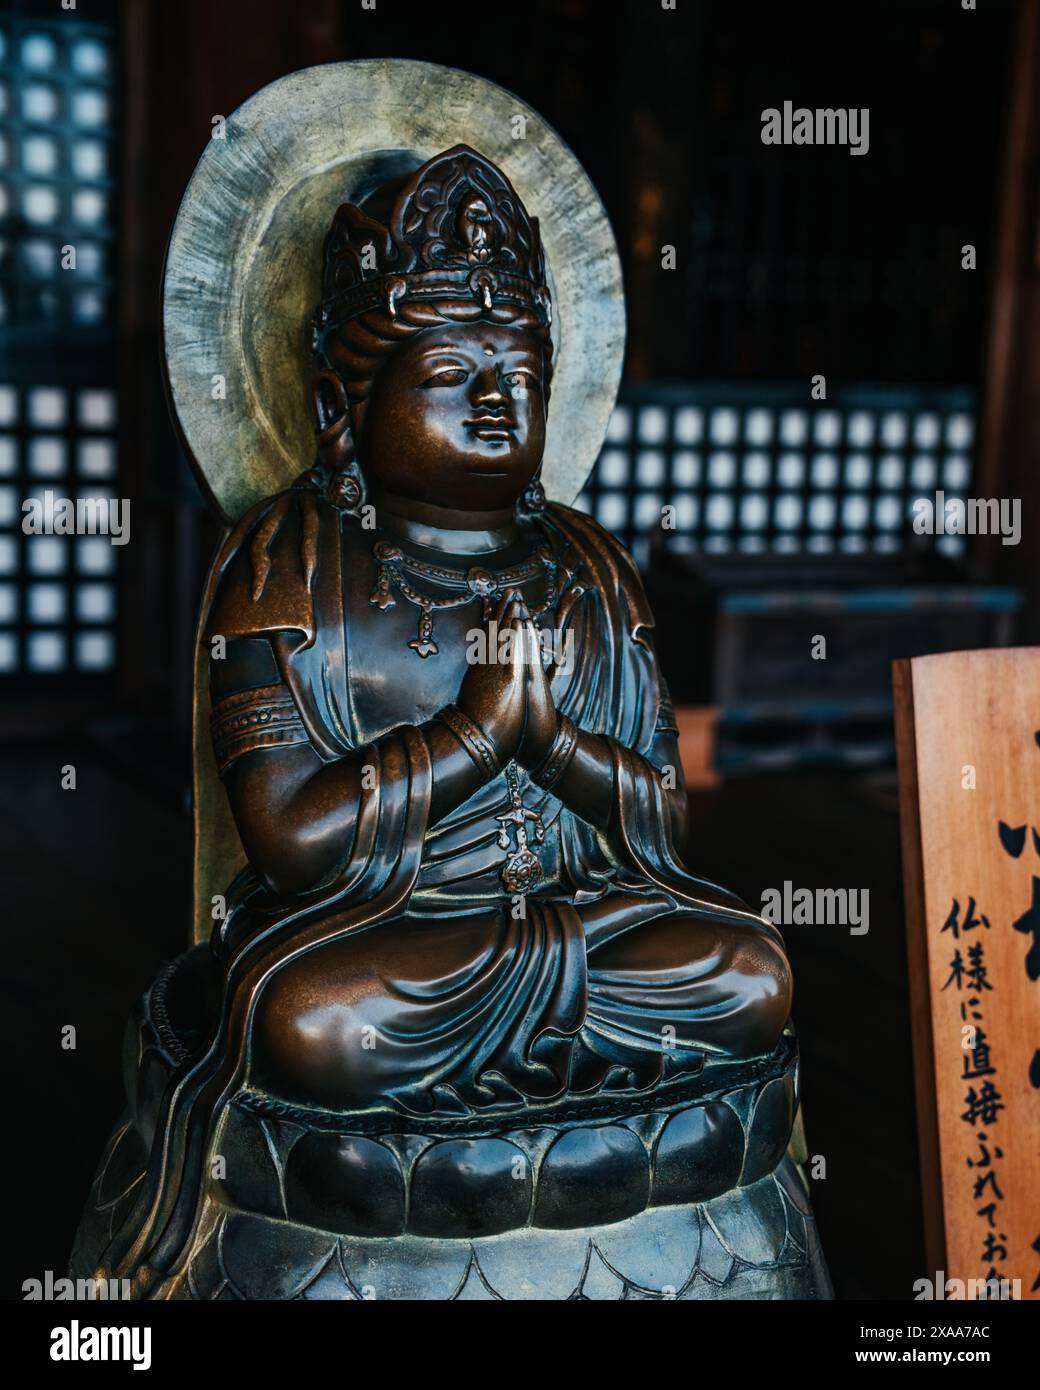 The Famous Buddha statue idol shrine in the ancient sacred Kiyomizudera Buddhist temple complex in Kyoto, Japan Stock Photo